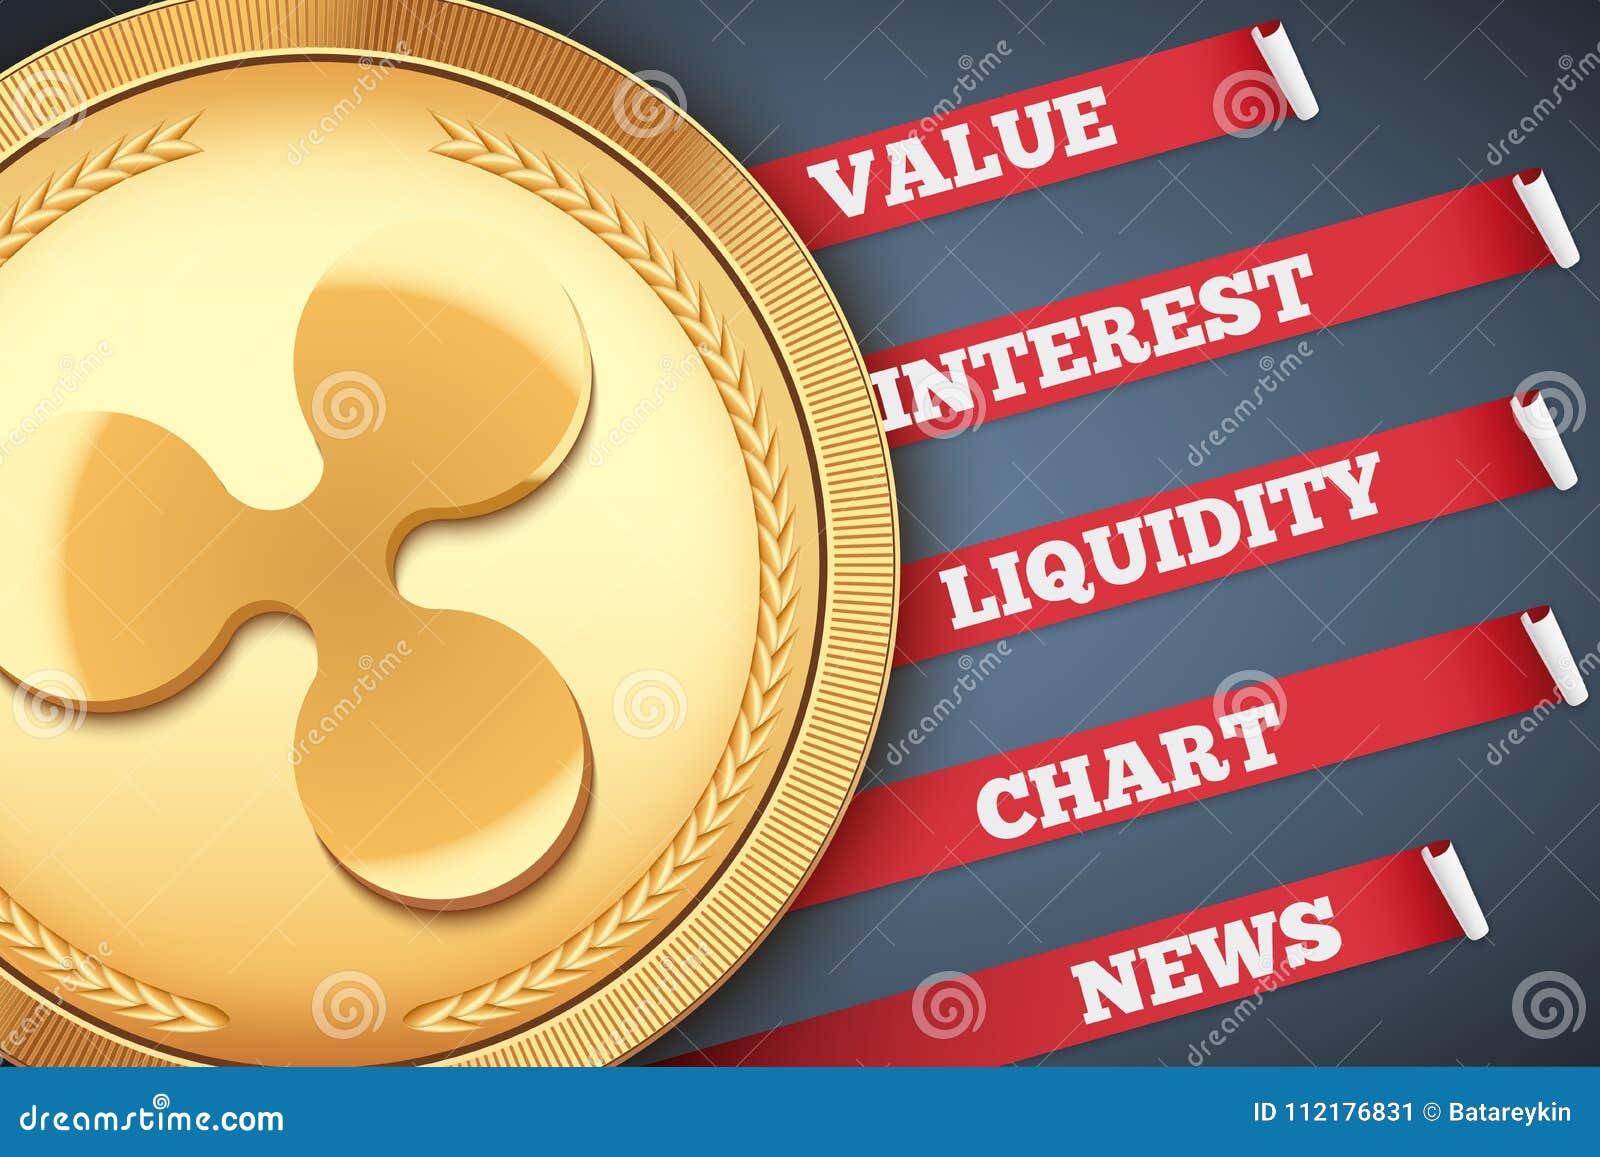 Background Of Ripple Cryptocurrency Infographic Stock ...